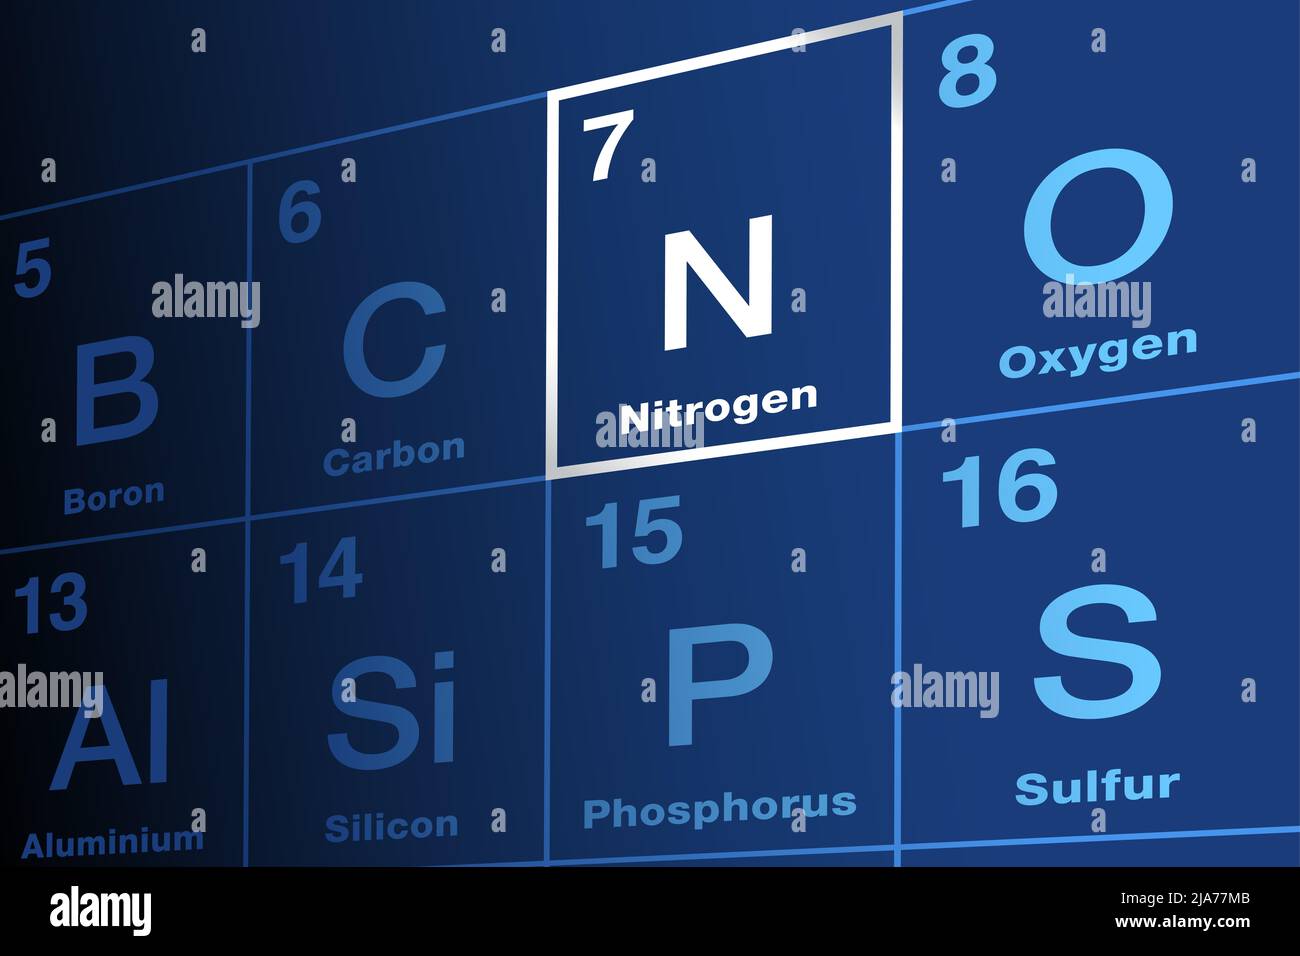 Nitrogen on periodic table of the elements. Chemical element with symbol N and atomic number 7. Occurs in all organisms. Stock Photo